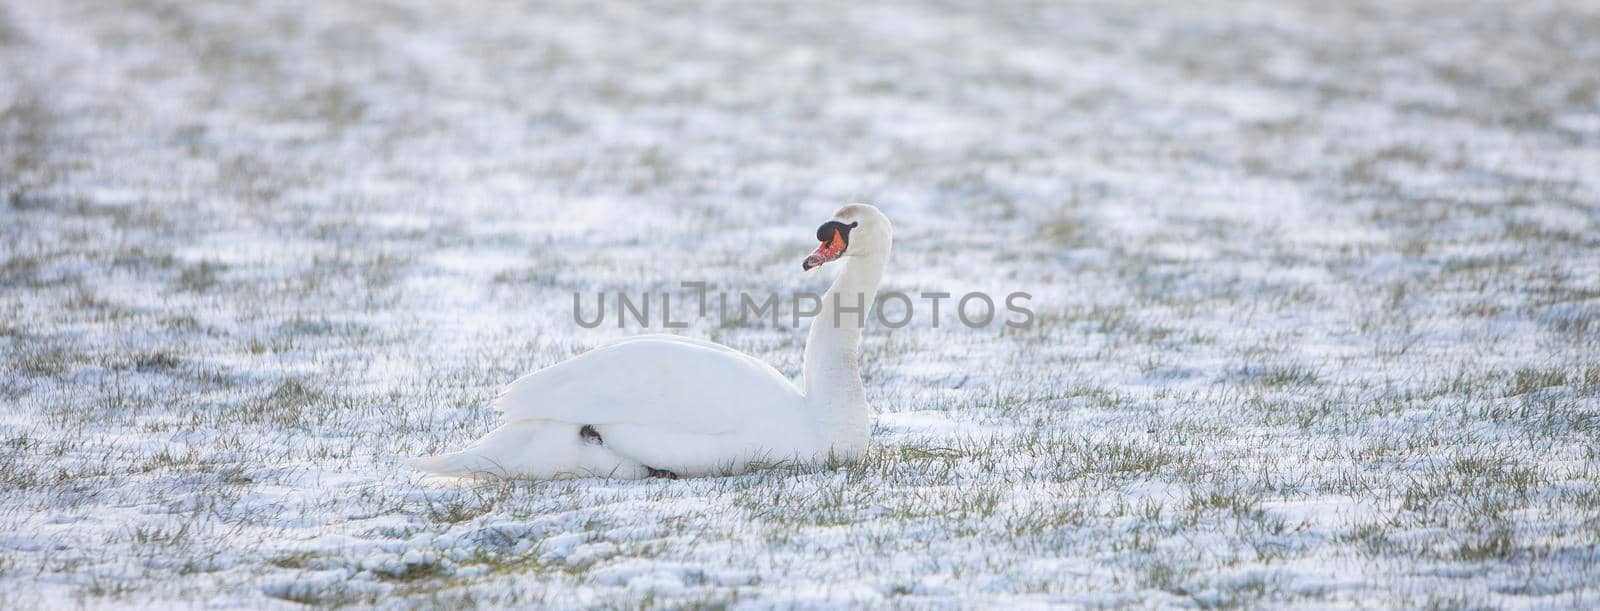 swan sits in snow covered grassy meadow and looks alert